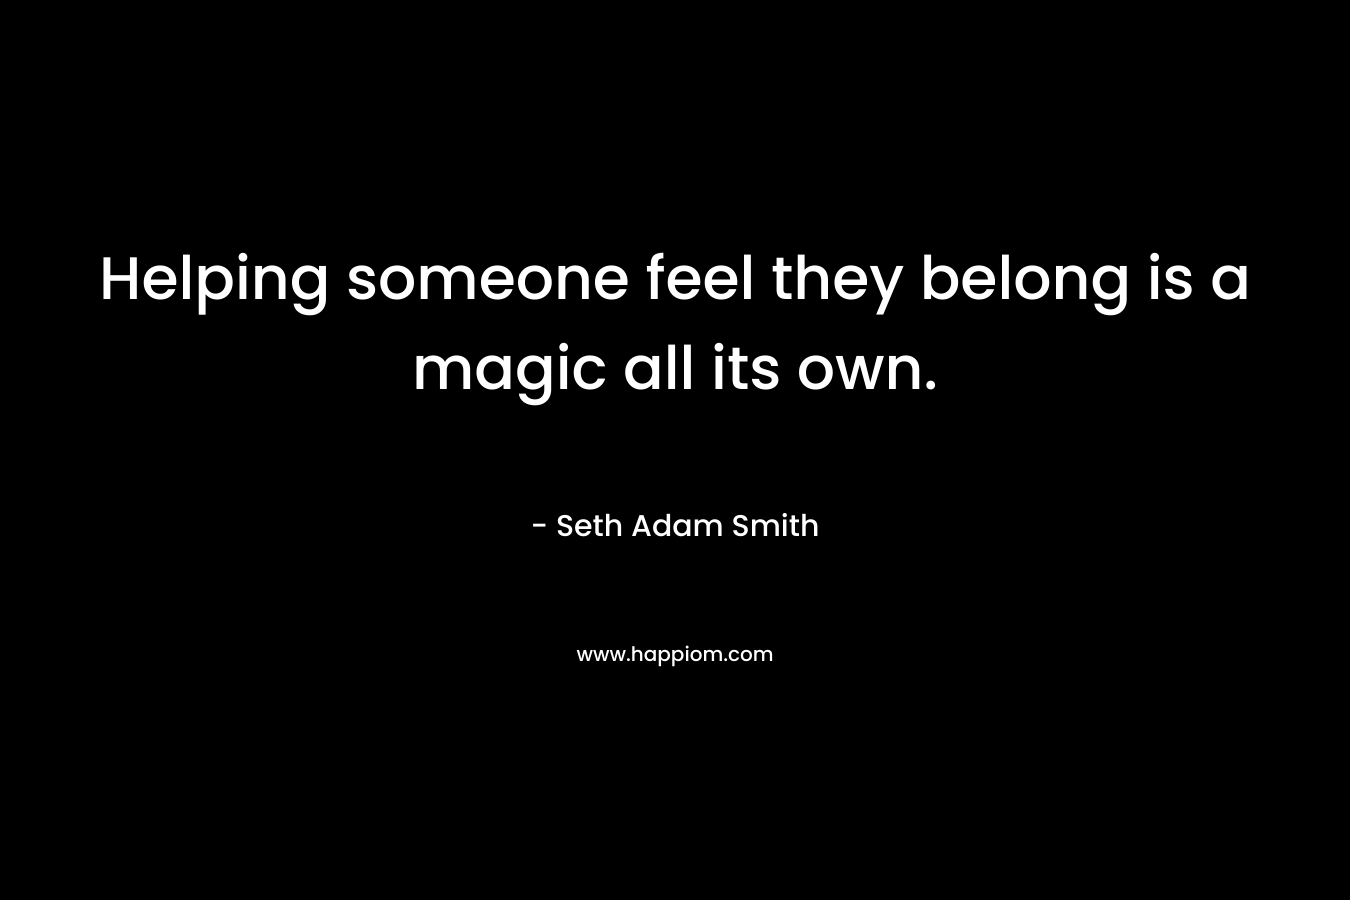 Helping someone feel they belong is a magic all its own.